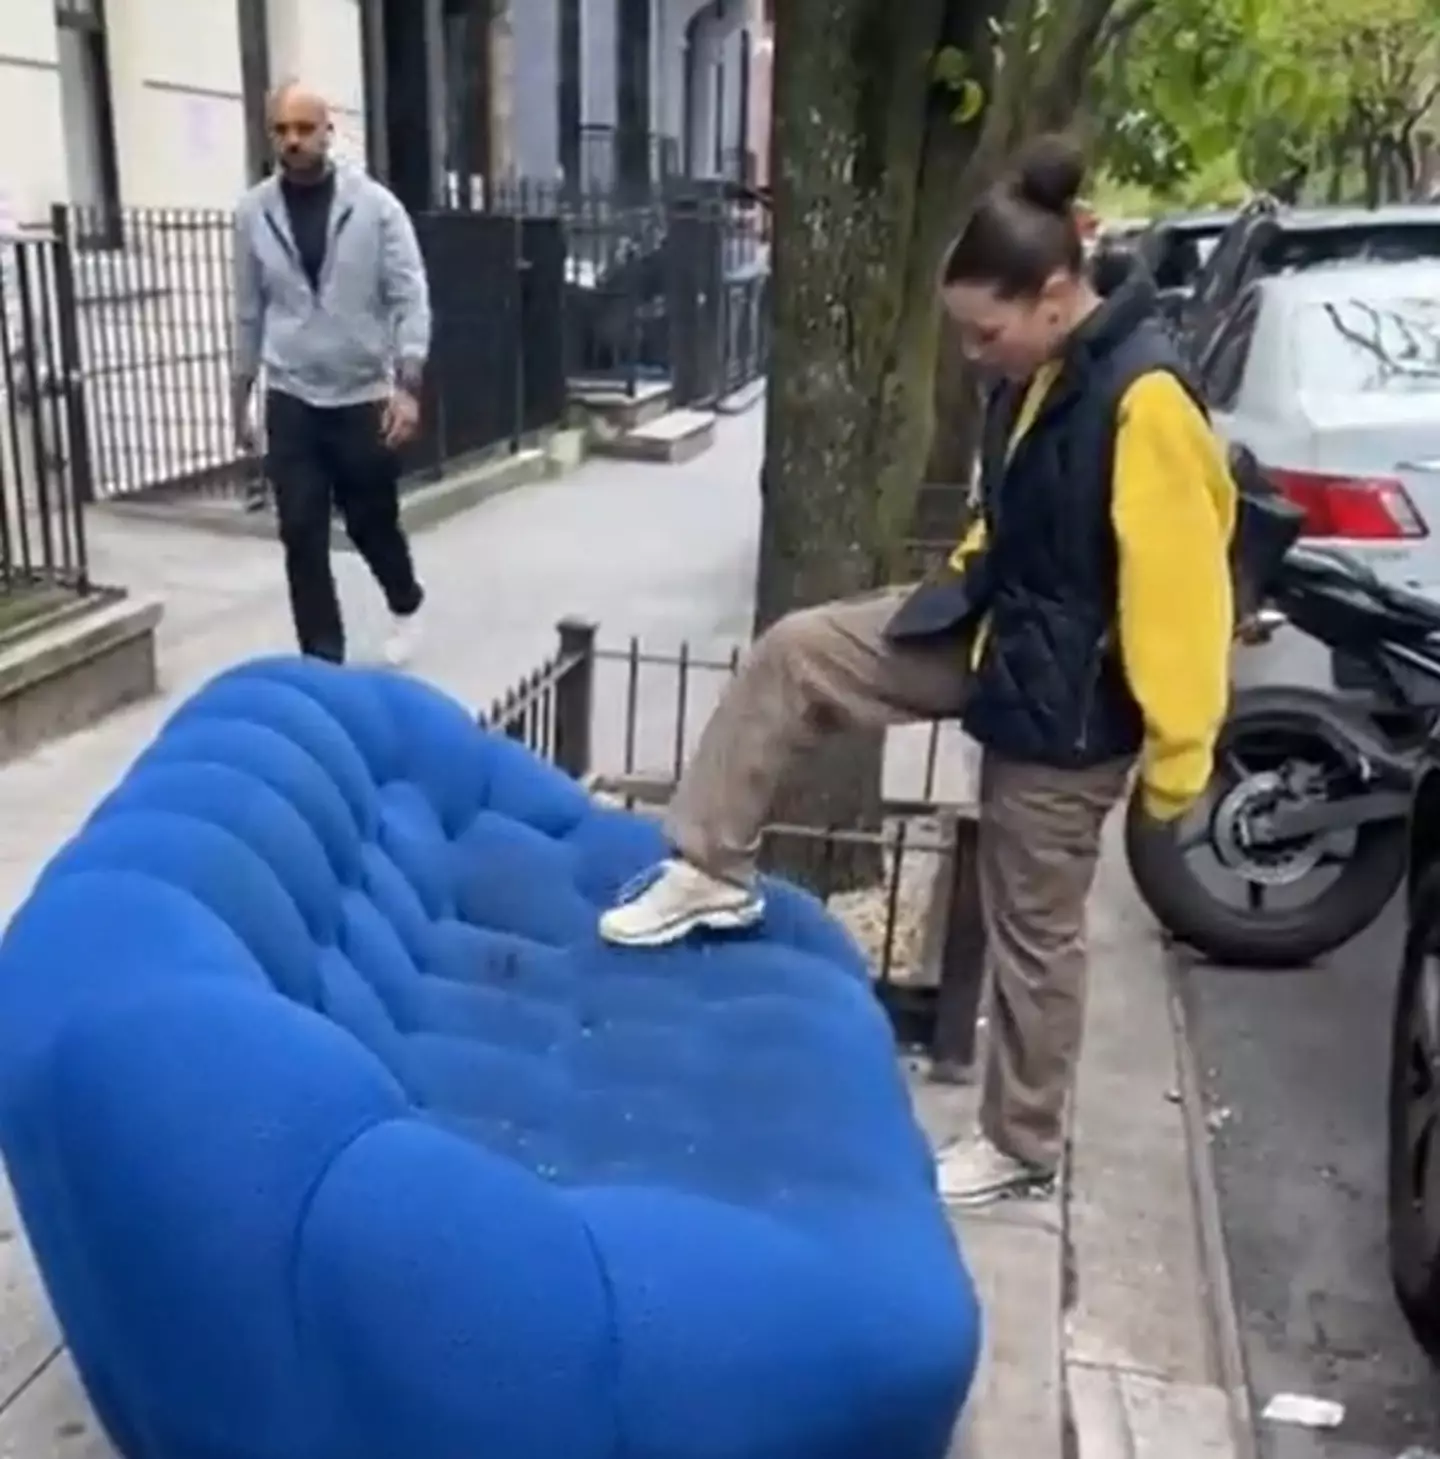 Amanda Joy found a dirty couch discarded in the street and decided to take it home.